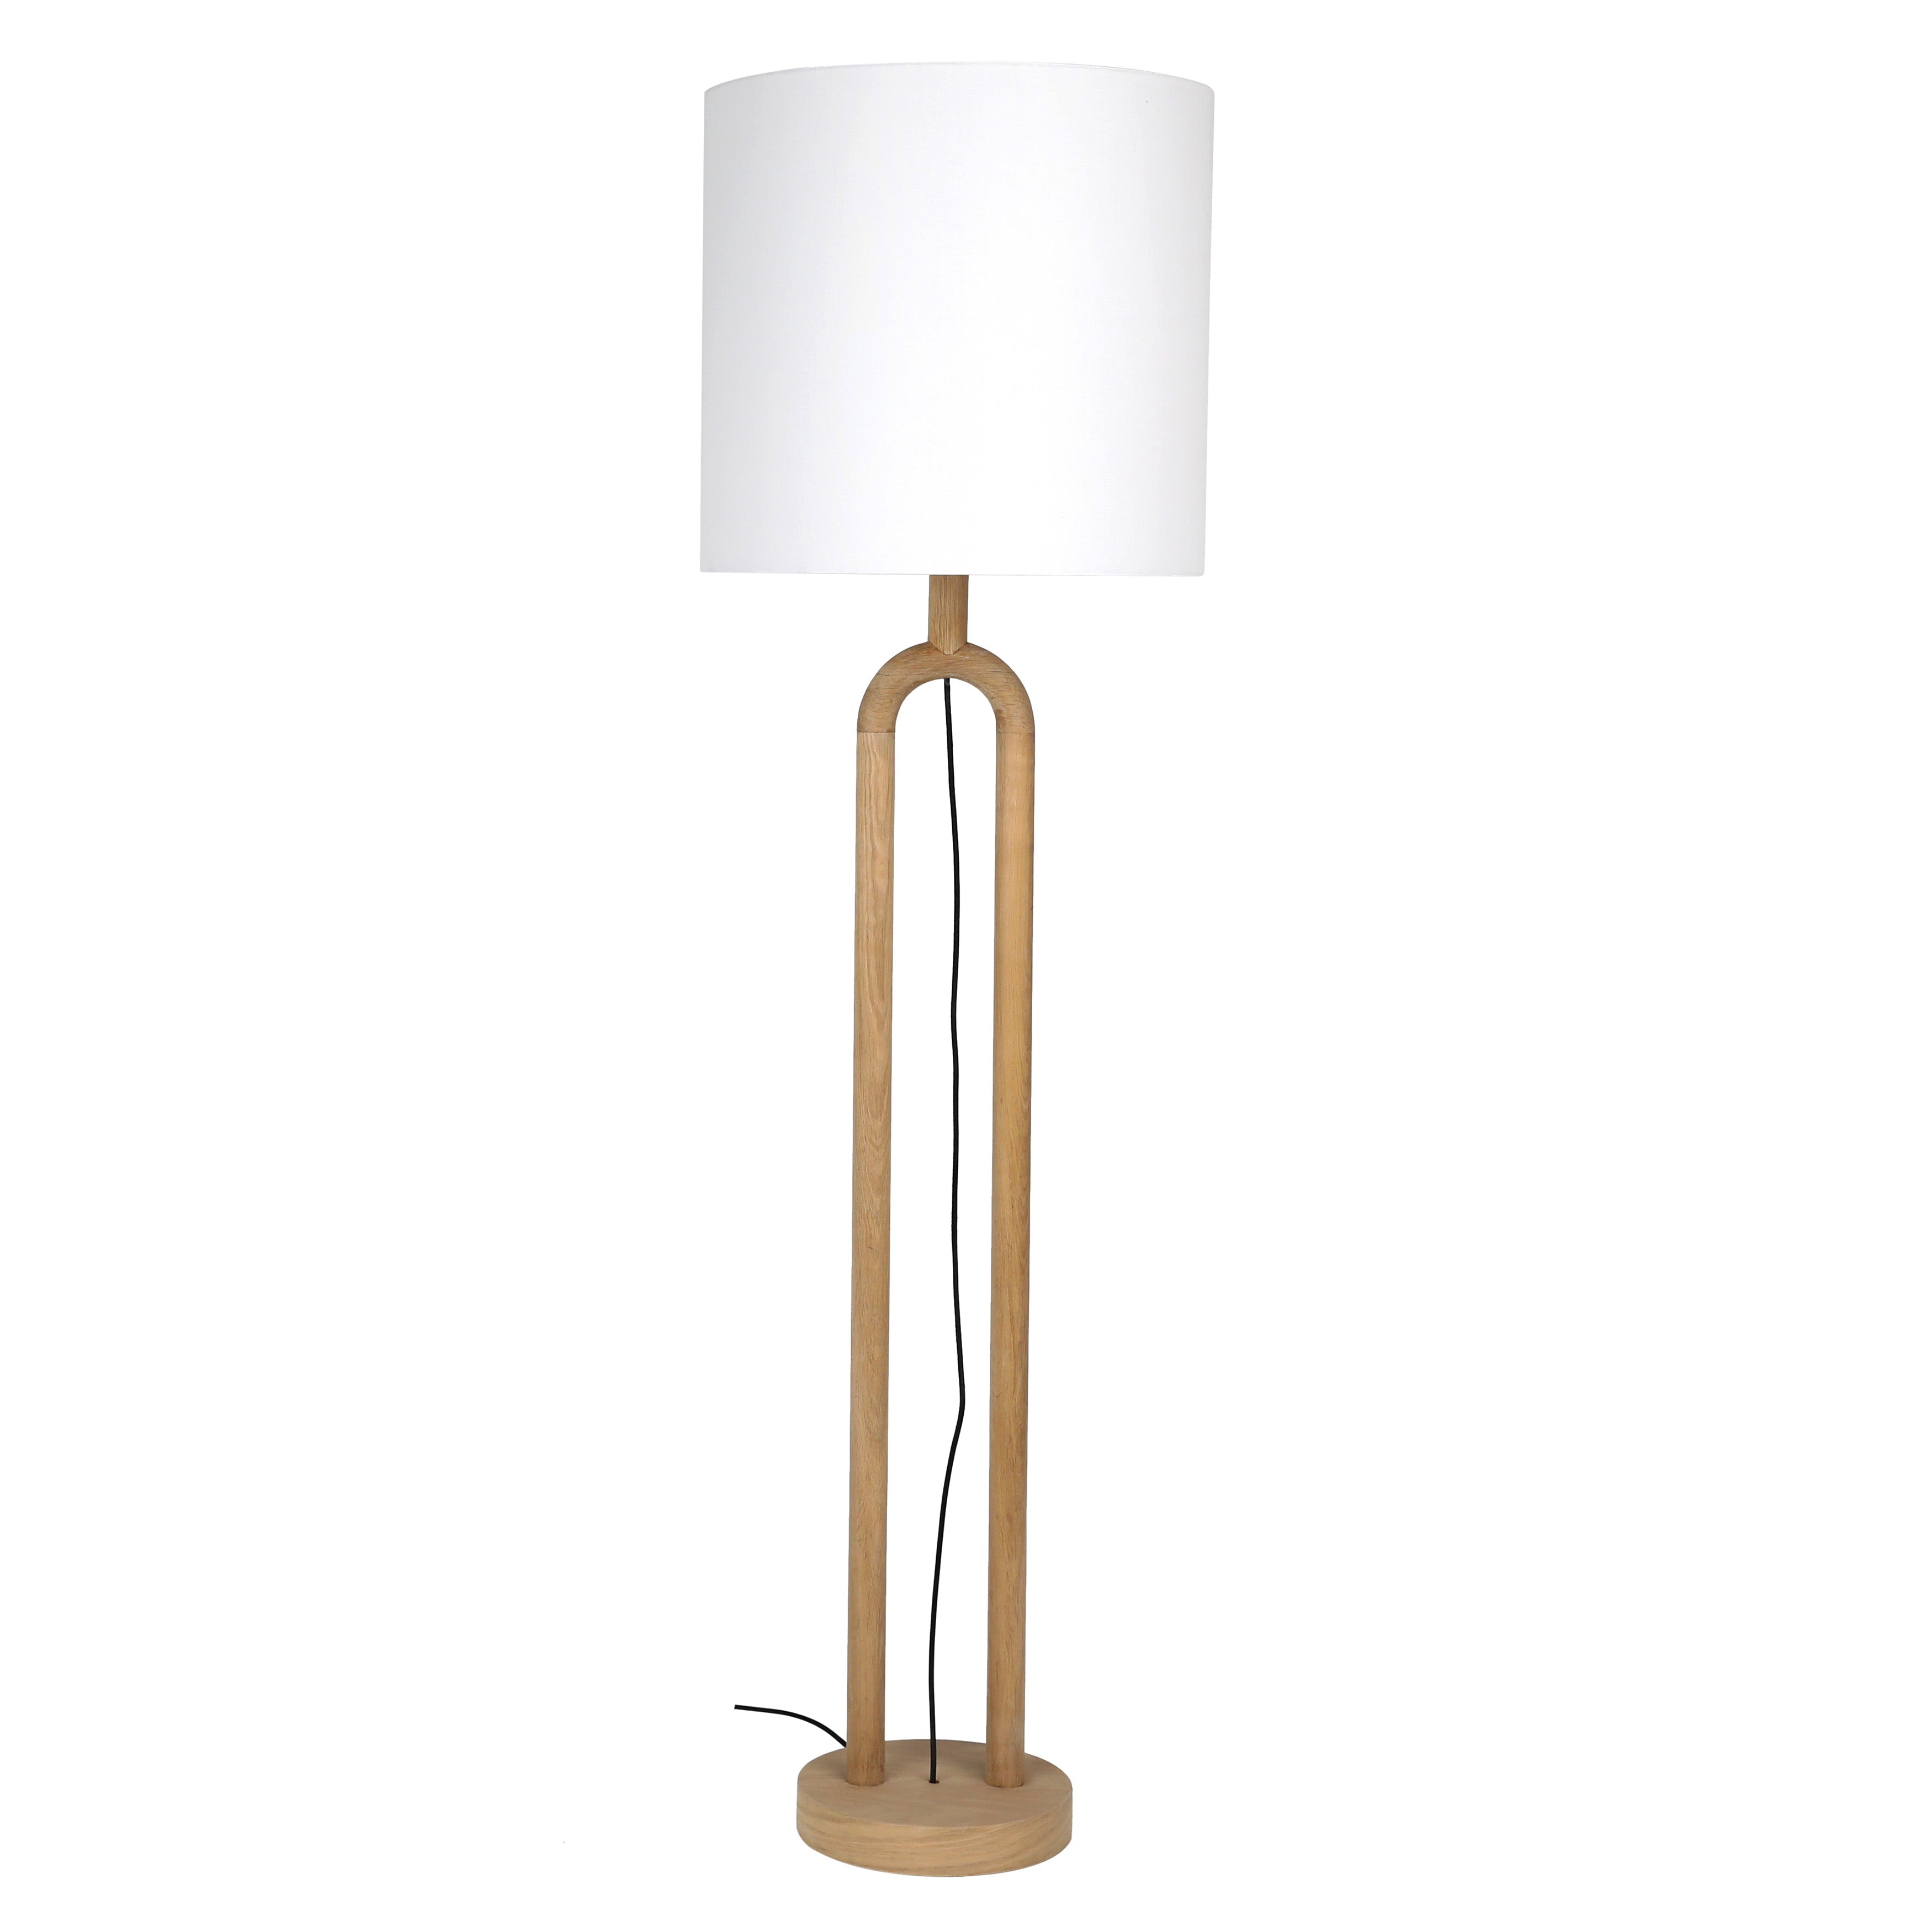 Add solid texture to your home with this contemporary oak wood floor lamp. Featuring a white linen lampshade and an open-arch wooden stand, this floor lamp makes a striking statement in a living room, den, or bedroom. The slim, minimalist design makes it effortlessly easy to fit various décor styles.Depth : 19.5 in Amethyst Home provides interior design, new home construction design consulting, vintage area rugs, and lighting in the Austin metro area.